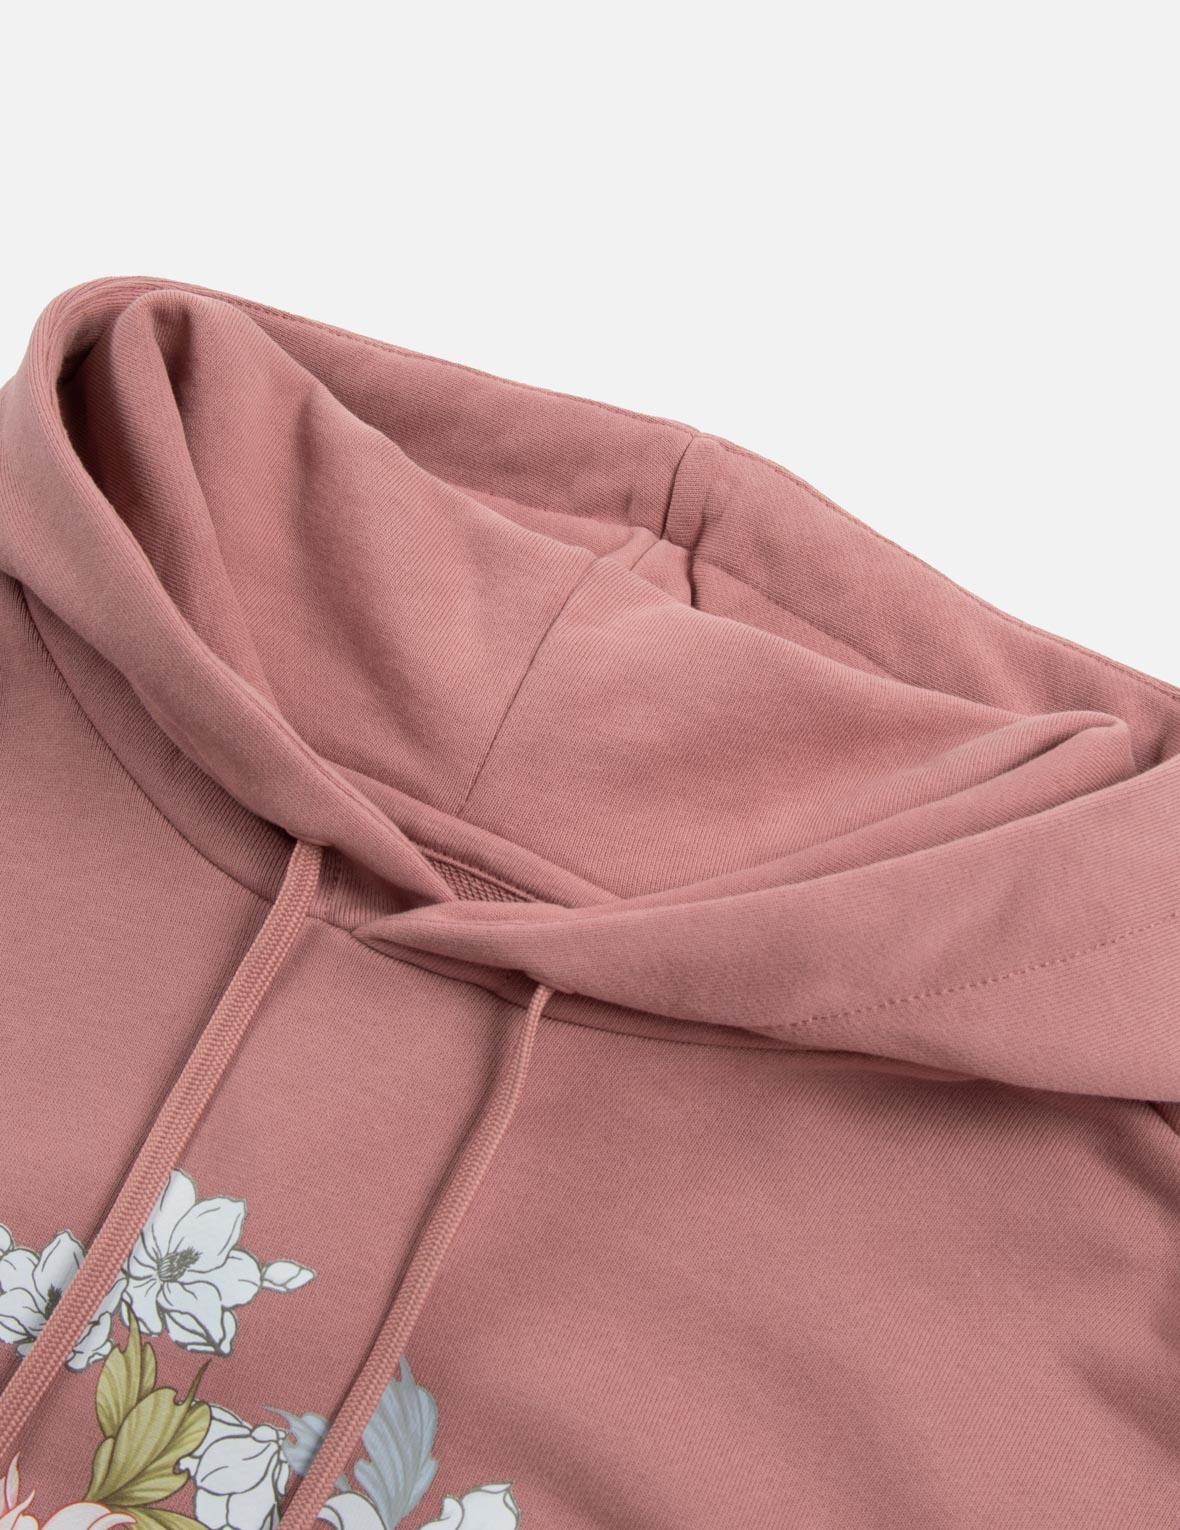 GOLDFISH AND FLORAL FLOW PRINT OVERSIZED HOODIE - 9